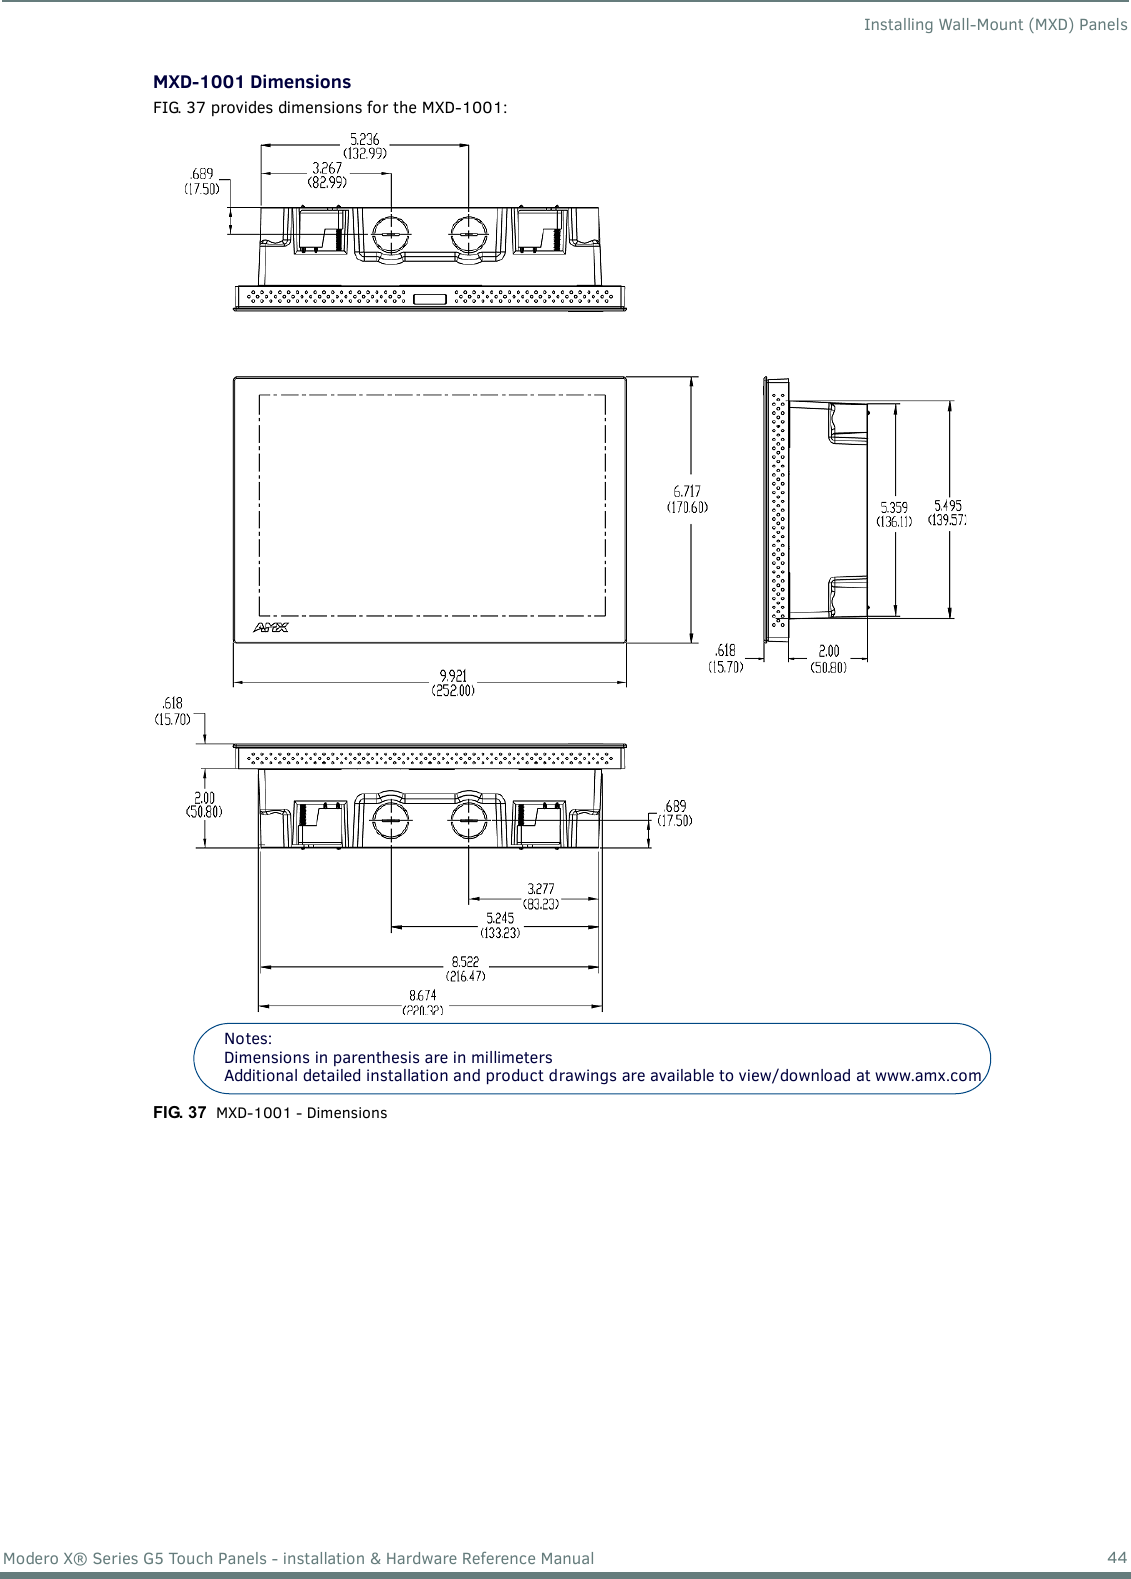 Installing Wall-Mount (MXD) Panels44Modero X® Series G5 Touch Panels - installation &amp; Hardware Reference ManualMXD-1001 DimensionsFIG. 37 provides dimensions for the MXD-1001: FIG. 37  MXD-1001 - DimensionsNotes: Dimensions in parenthesis are in millimetersAdditional detailed installation and product drawings are available to view/download at www.amx.com 